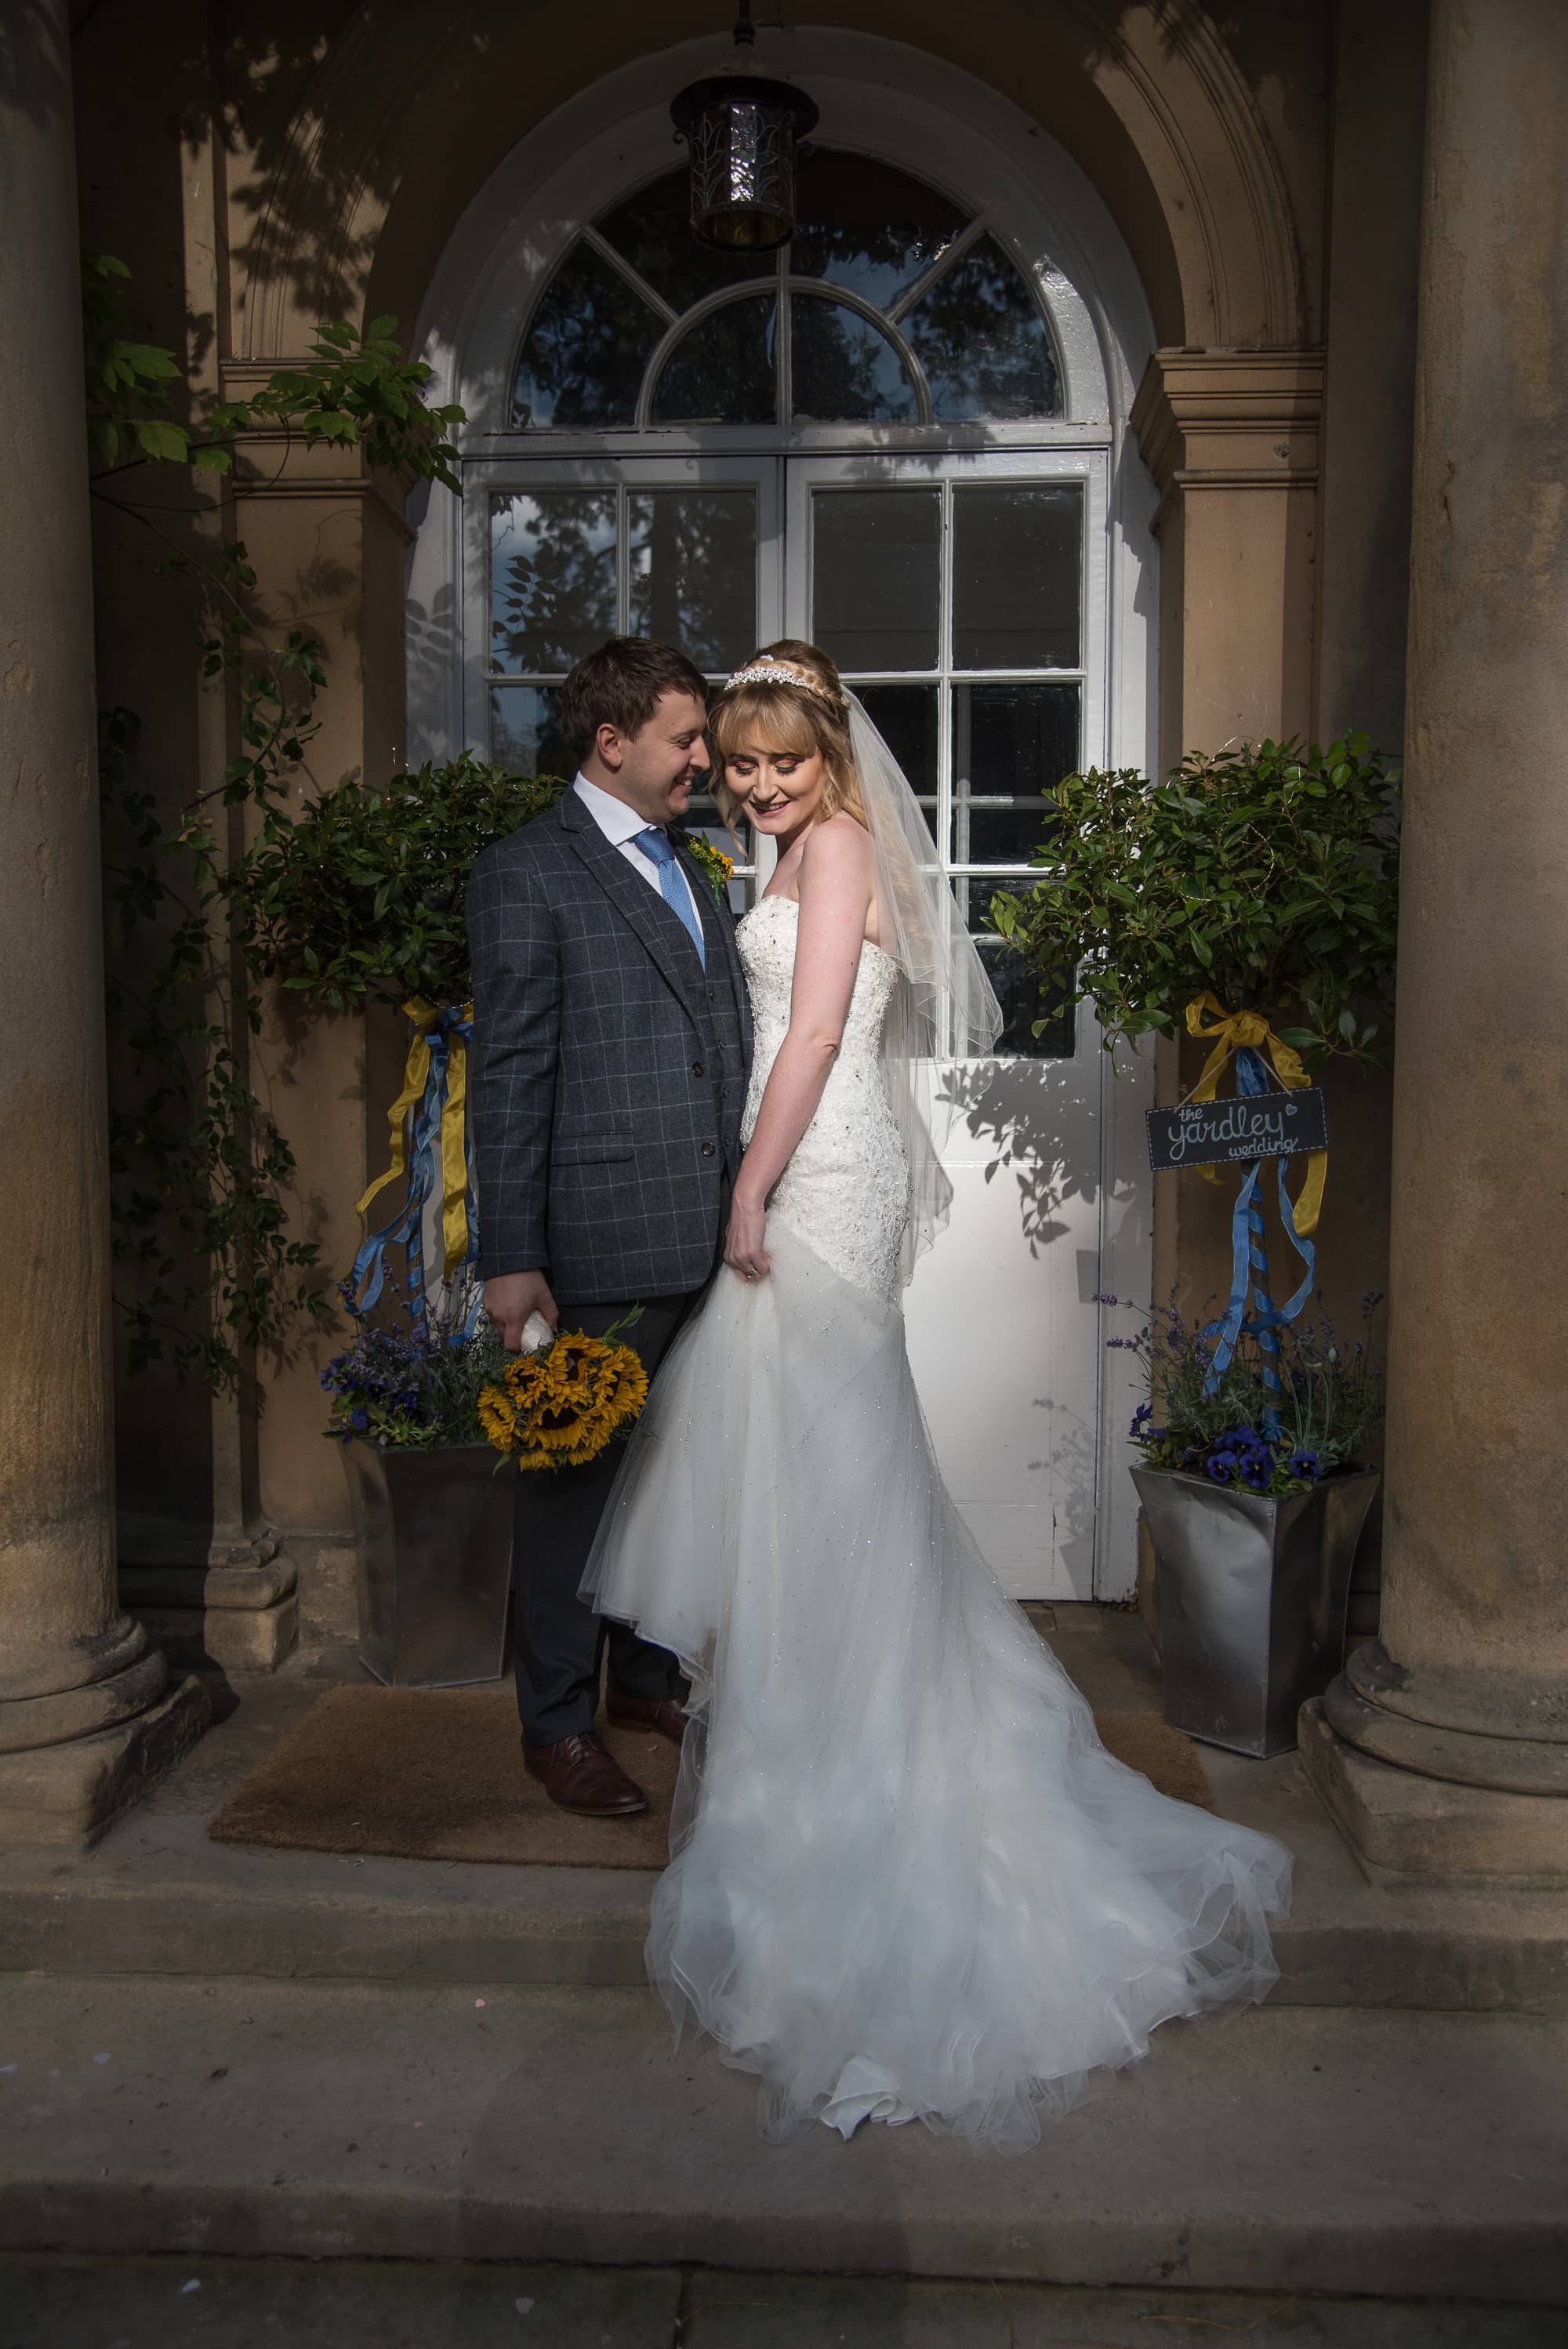 Middleton Lodge Wedding Photography, And Ever After Photography, North Yorkshire Wedding Photography